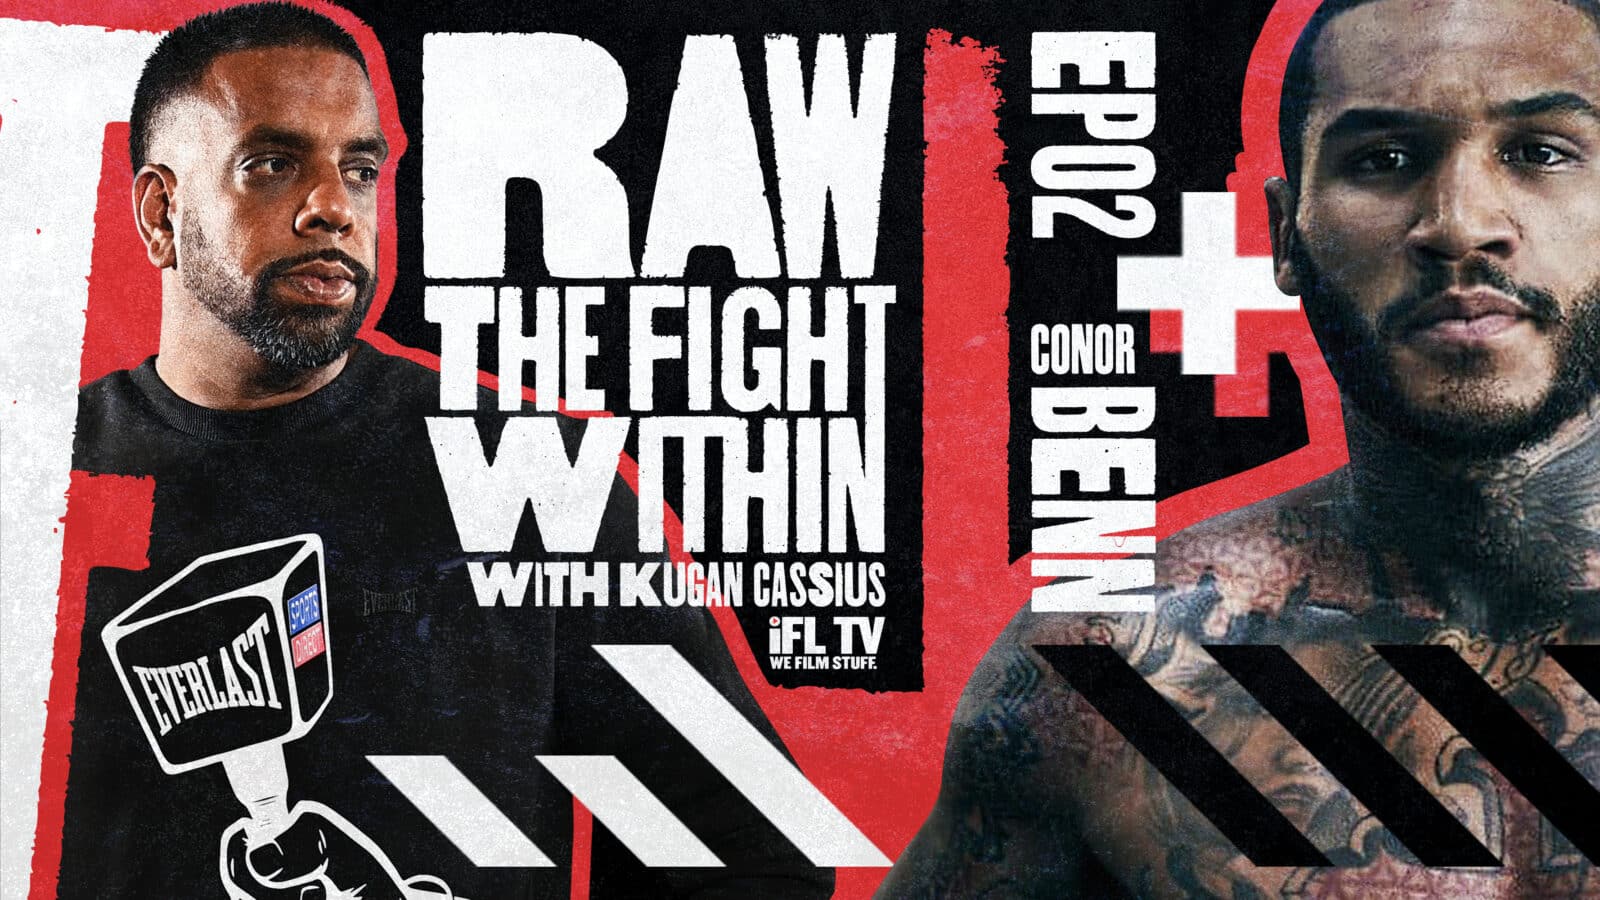 CONOR BENN THE LATEST BOXER TO GUEST ON RAW: THE FIGHT WITHIN - Boxing Image